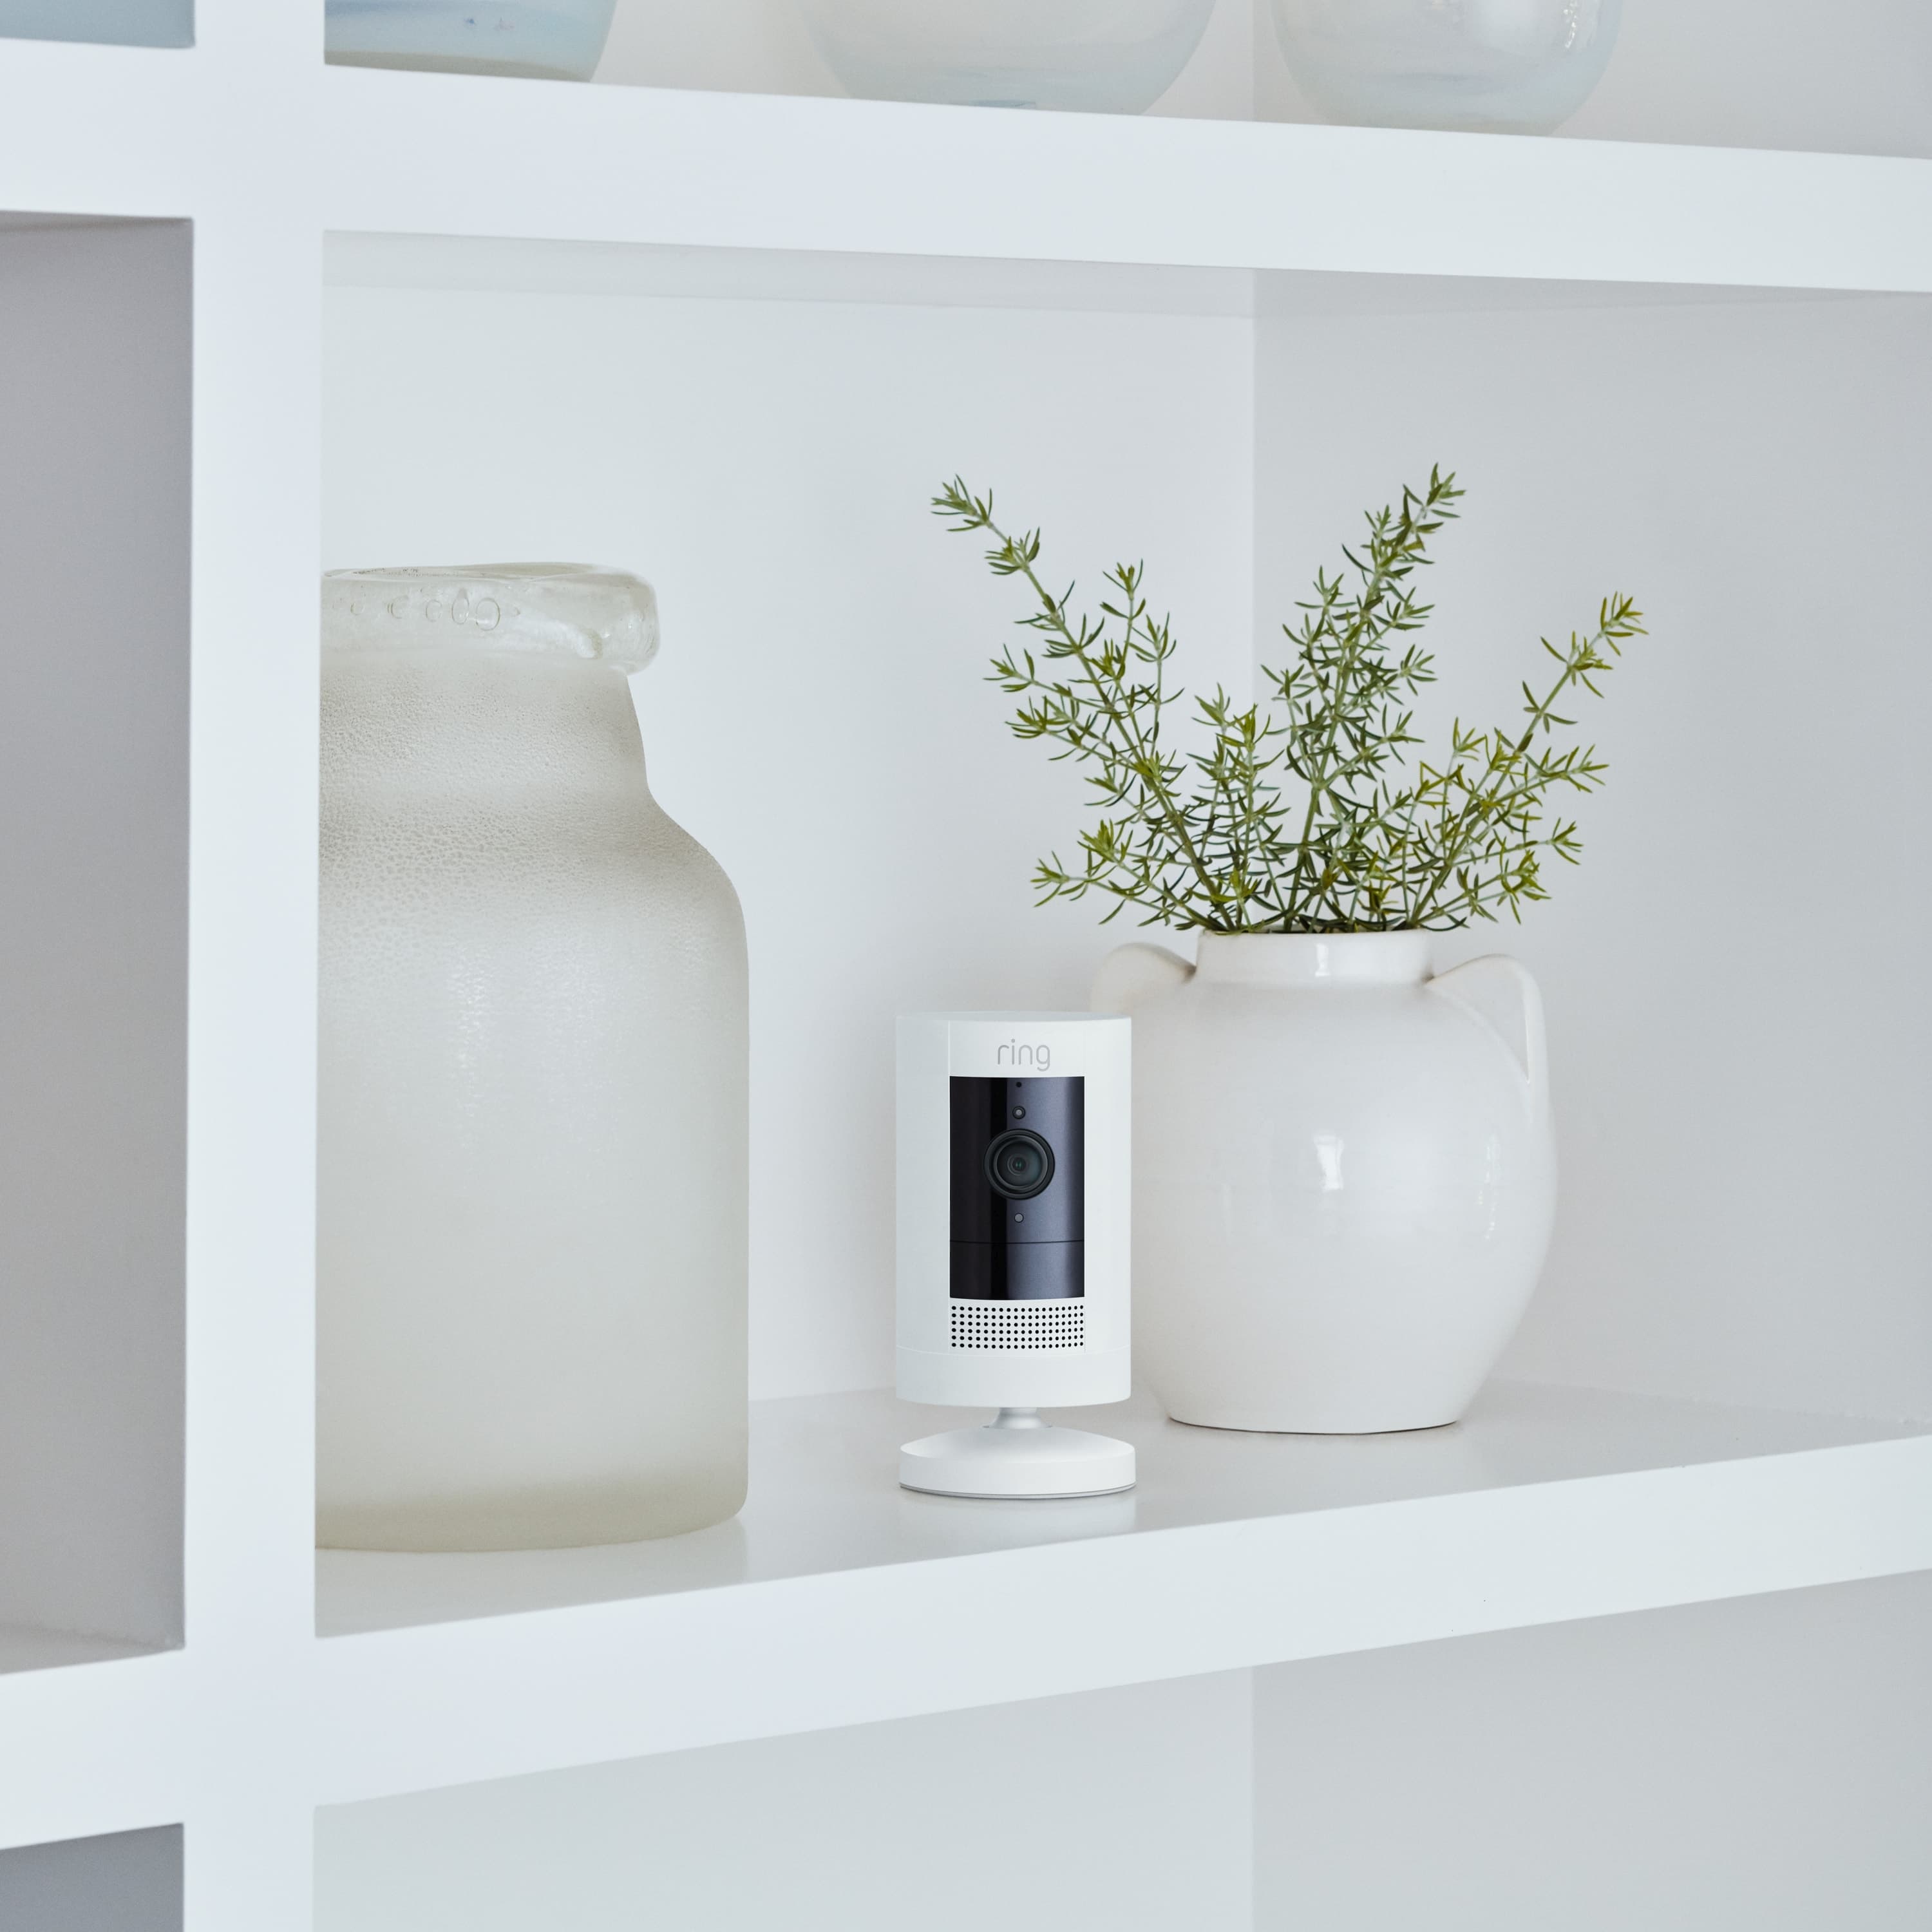 3-Pack Stick Up Cam Battery (for Certified Refurbished) - Inside a home, Stick Up Cam, Battery model in white, is situated on a shelf between 2 vases.